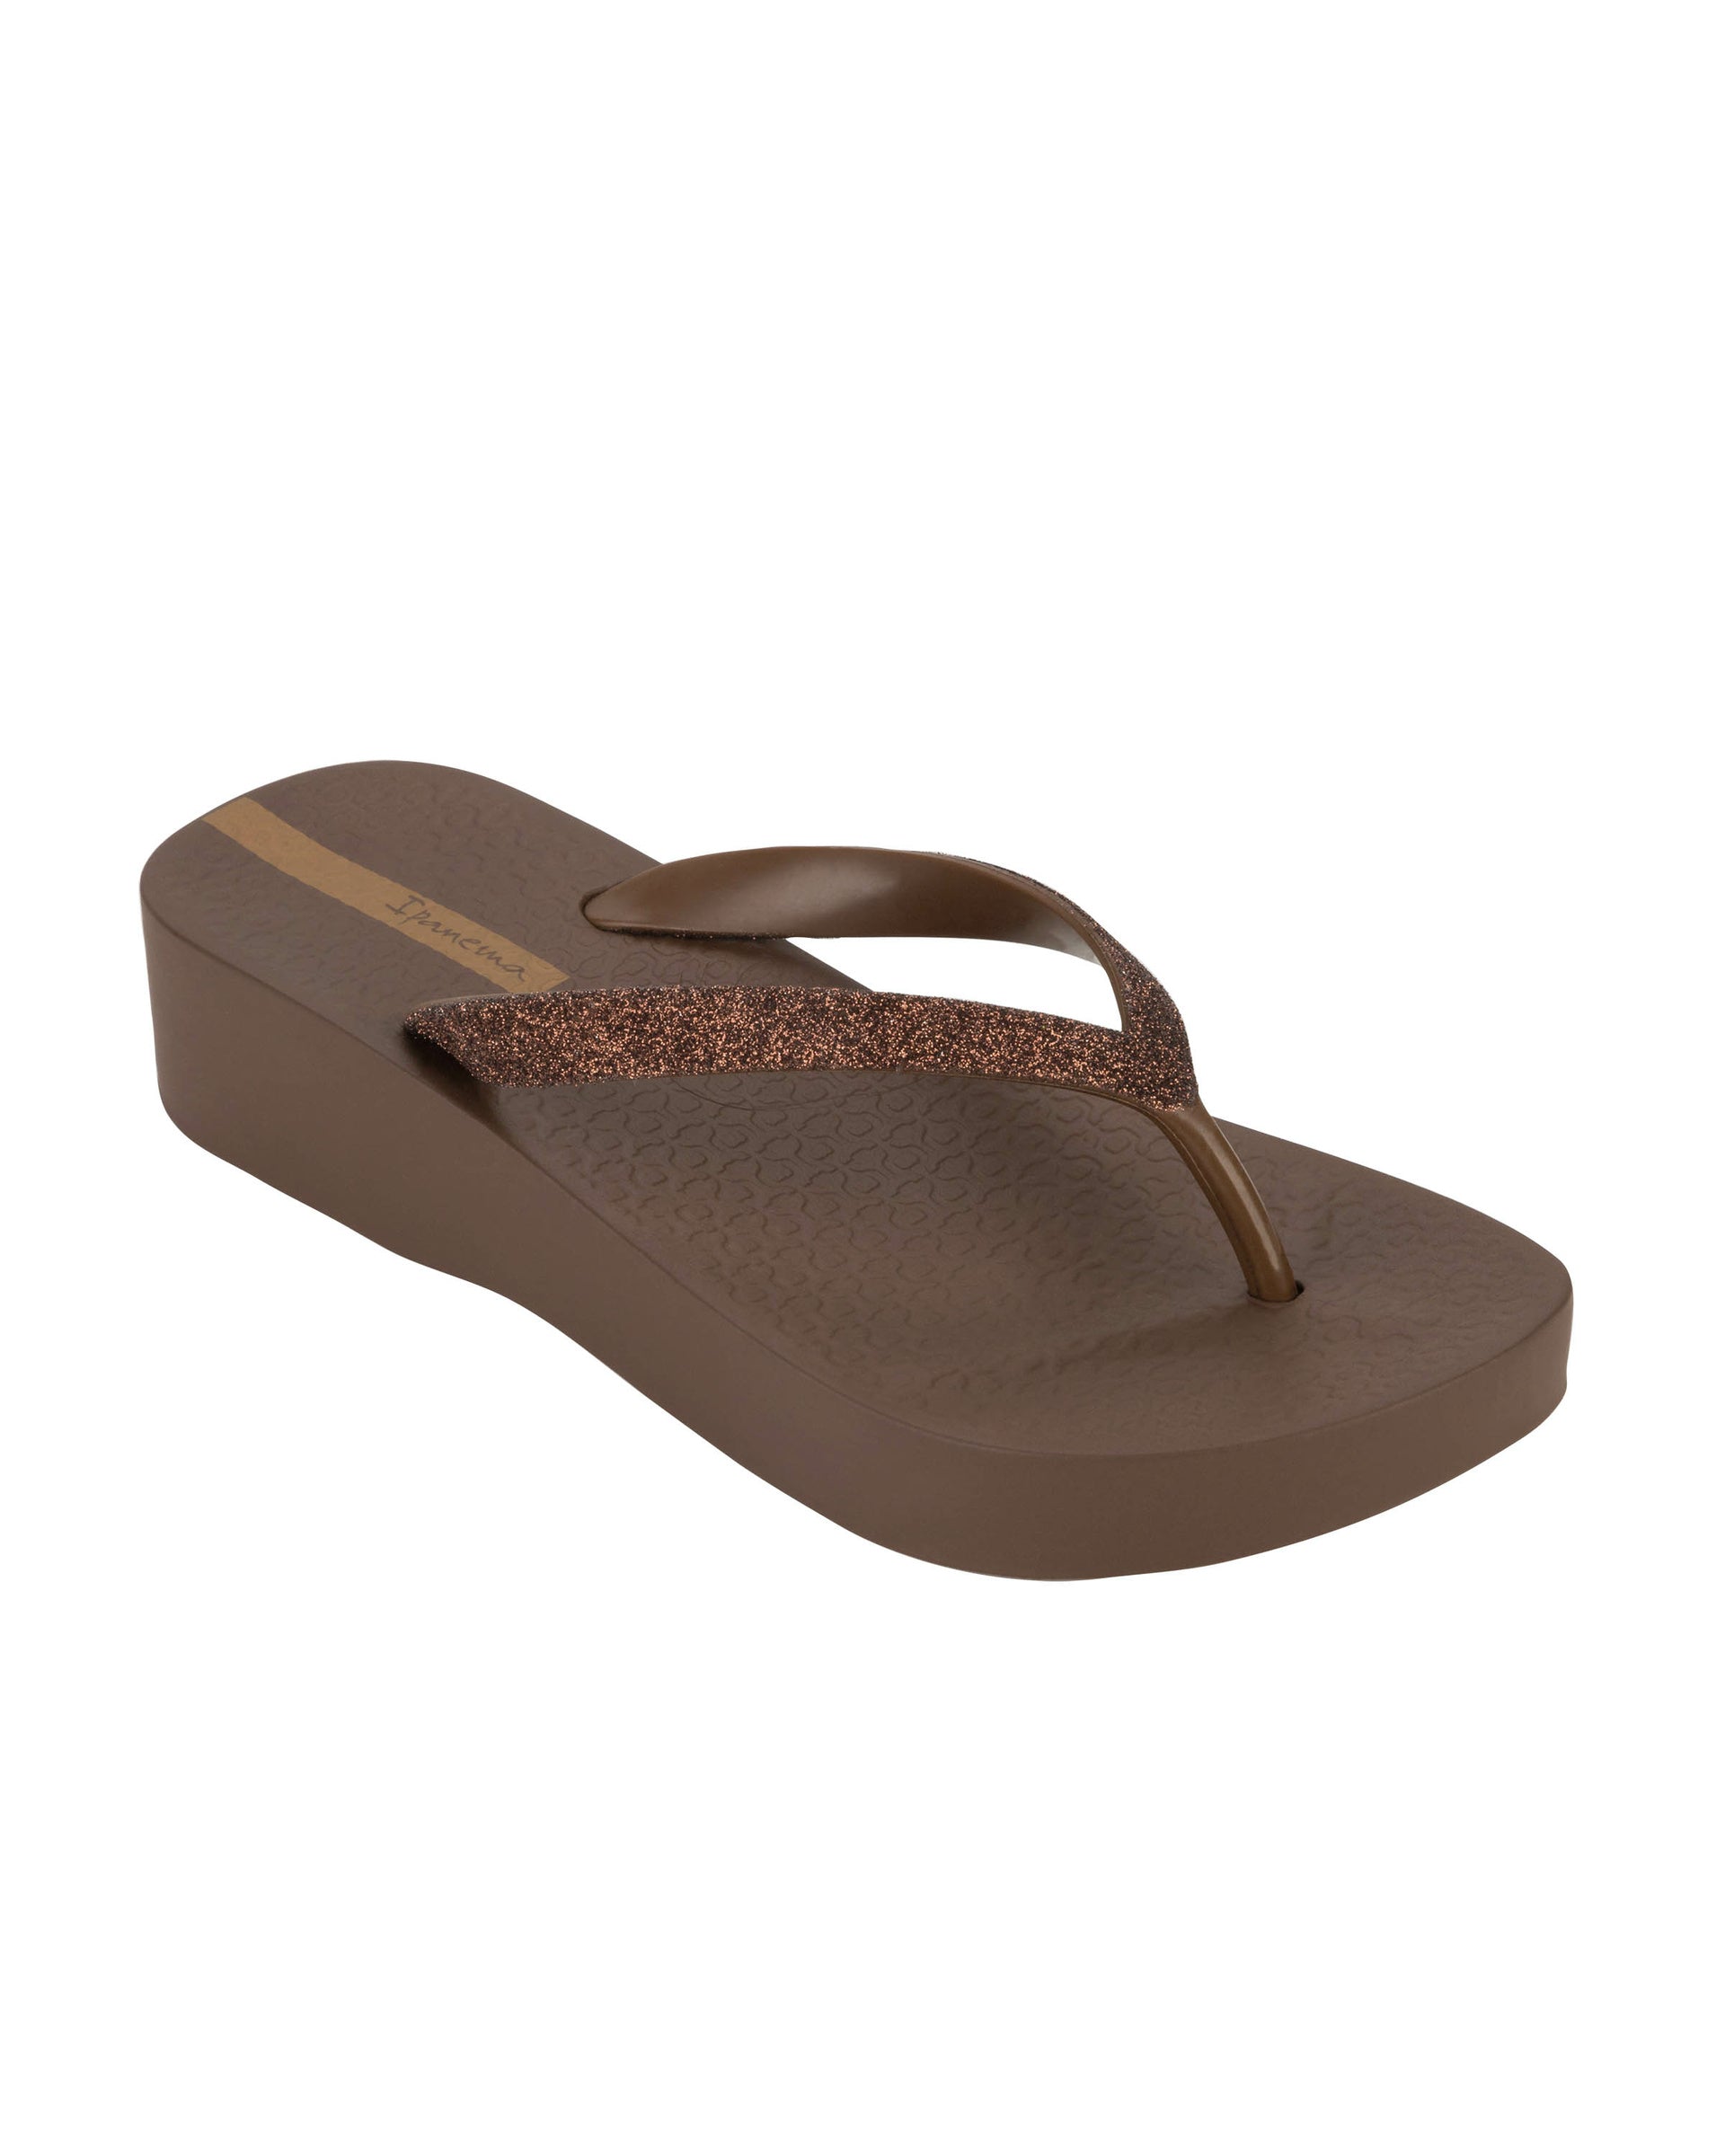 Angled view of a brown Ipanema Mesh Chic women's wedge flip flop with glitter brown straps.